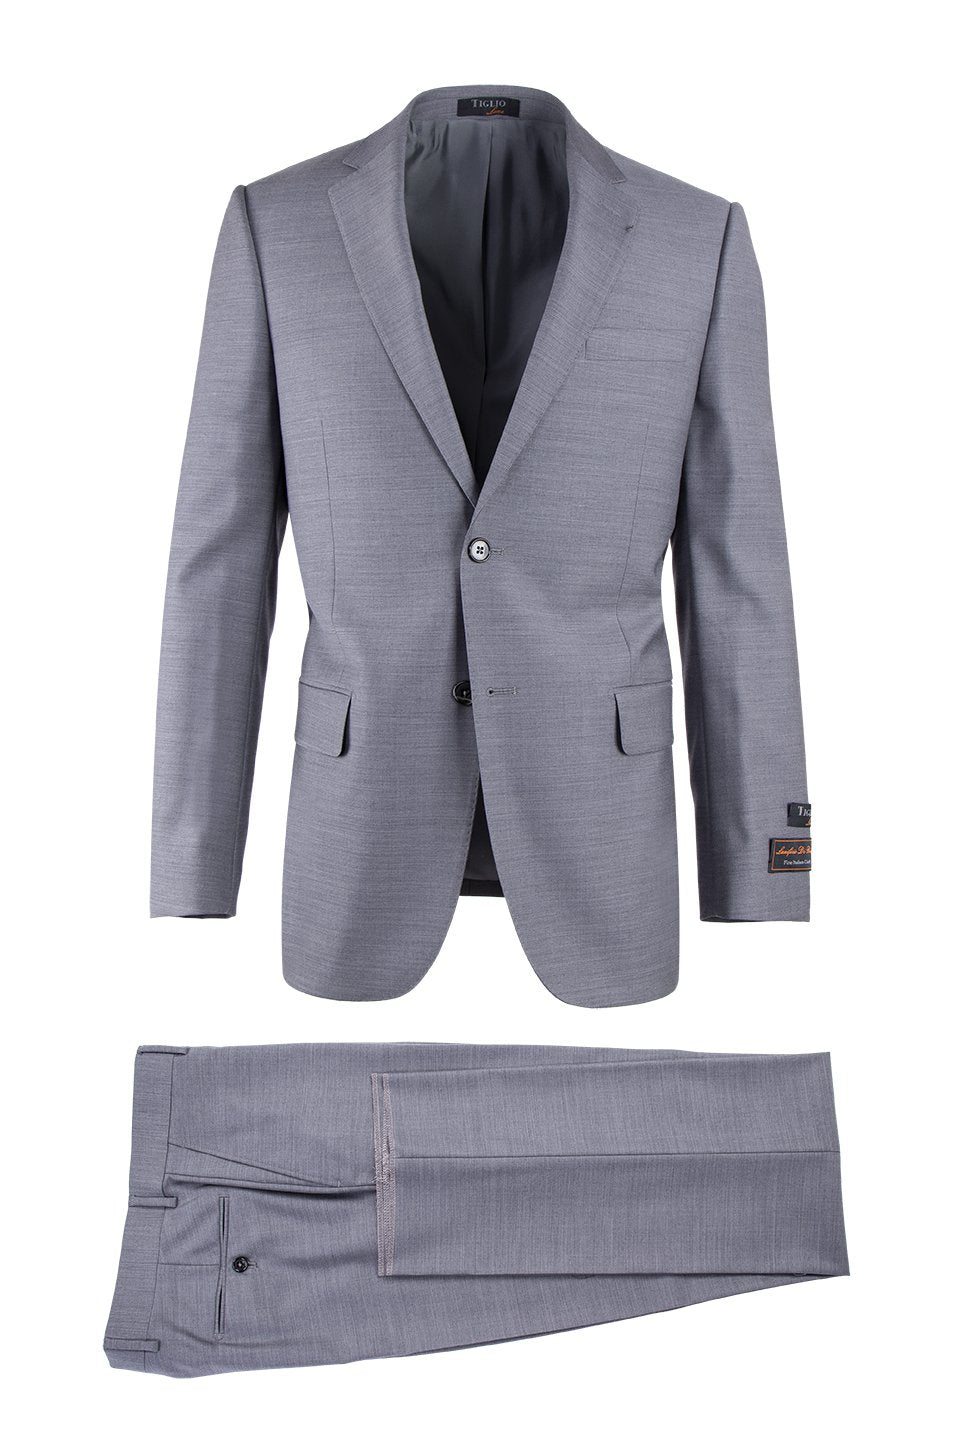 Novello Light Gray, Modern Fit, Pure Wool Suit by Tiglio Luxe